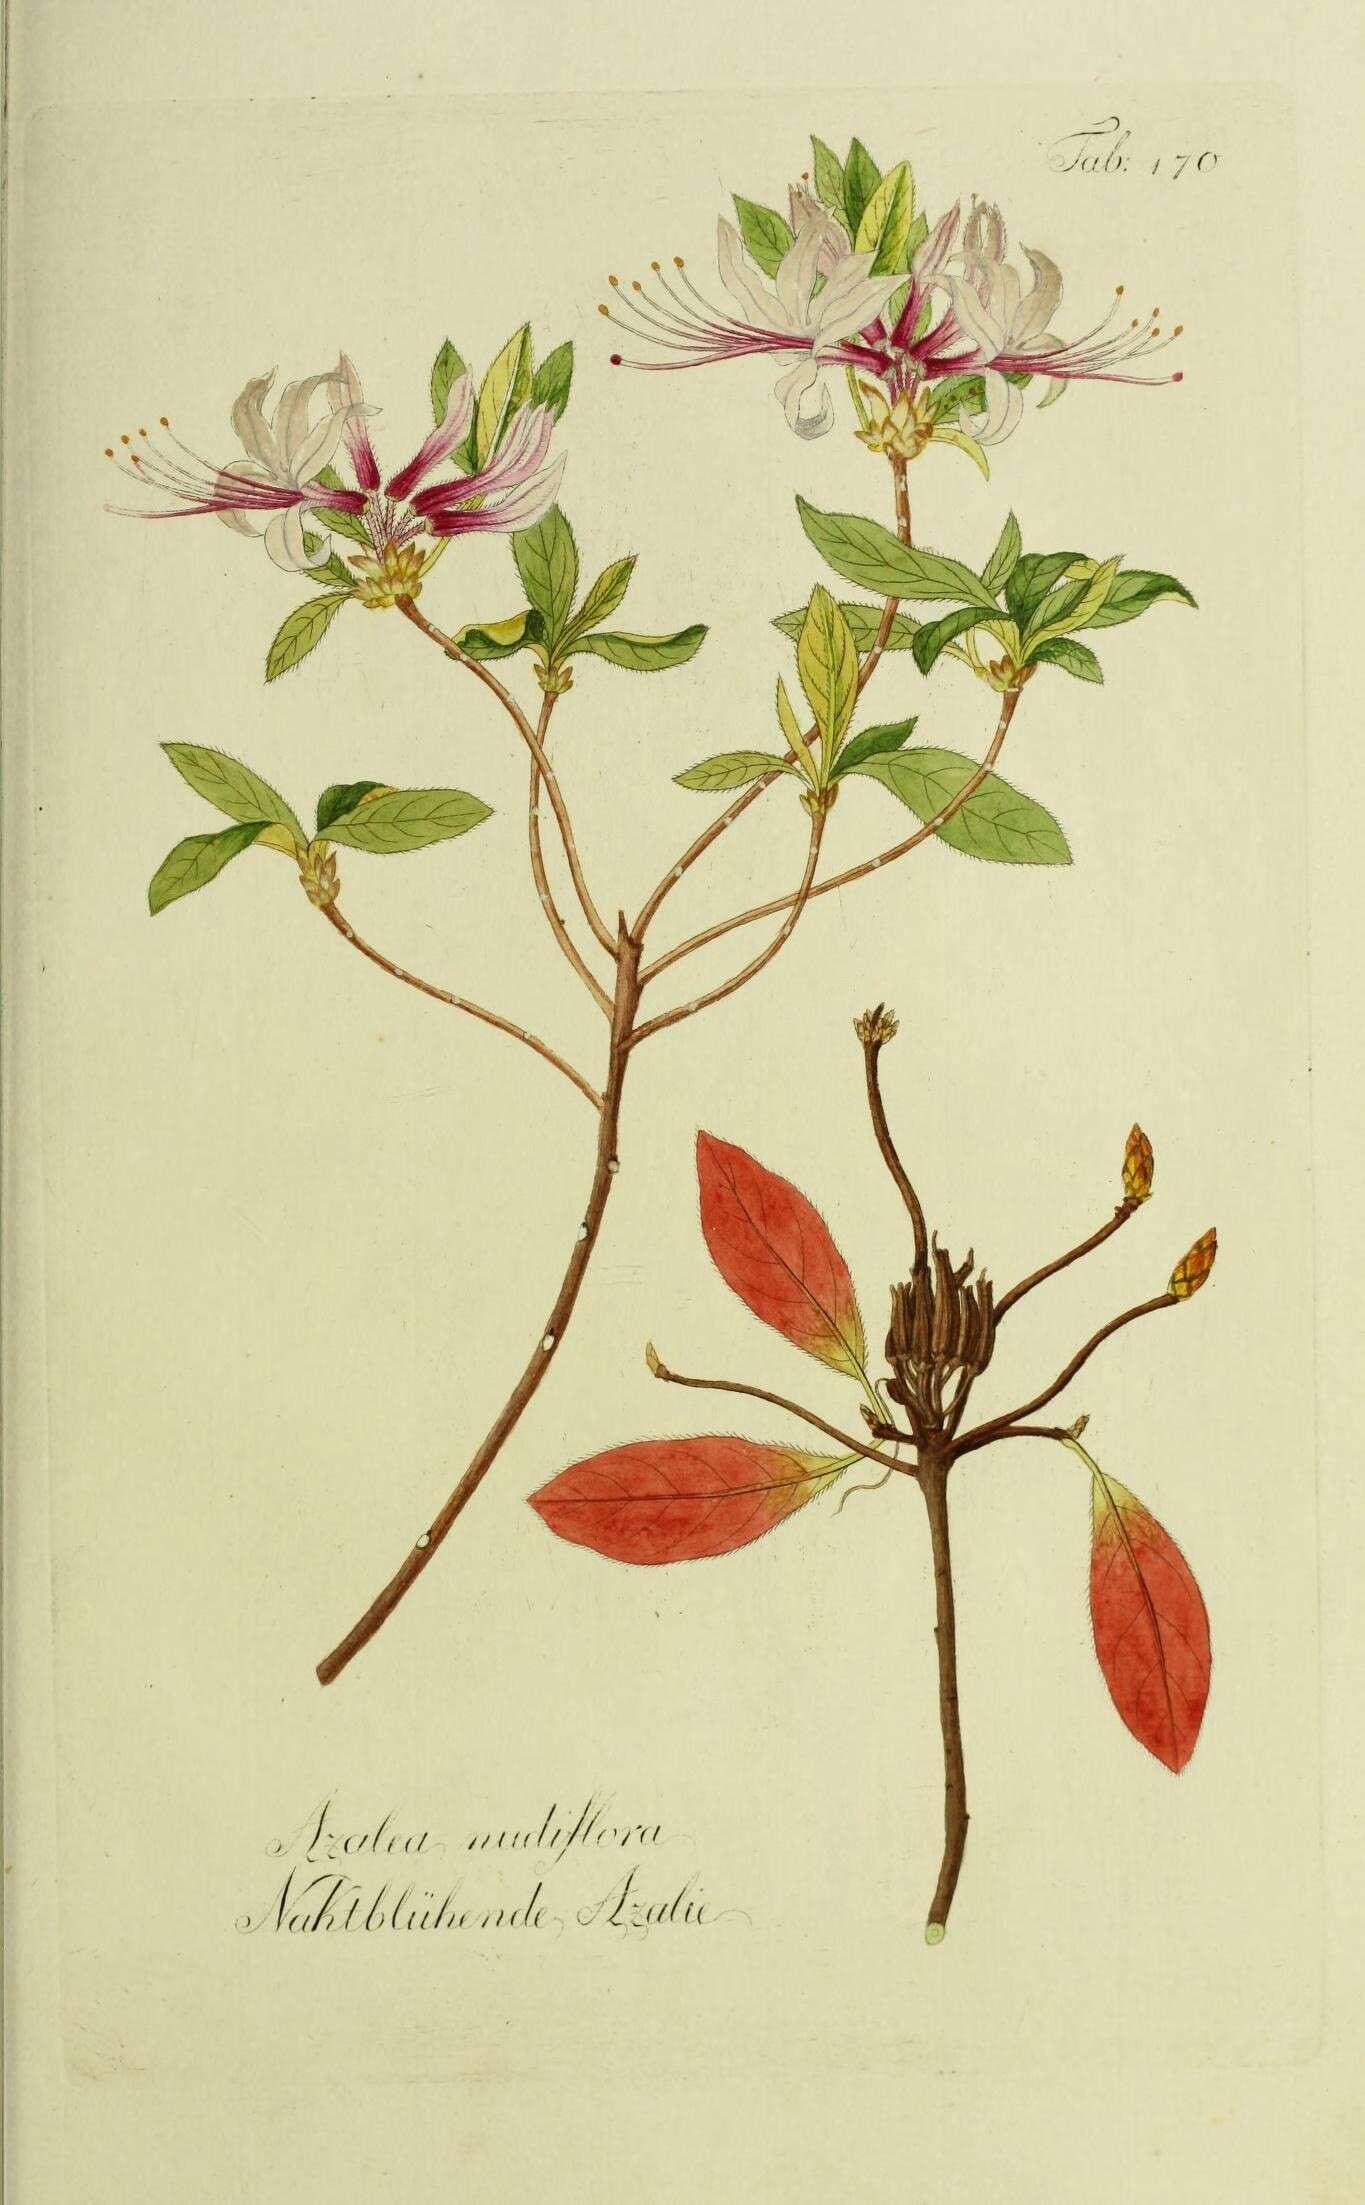 Rhododendron periclymenoides (Michx.) Shinners resmi